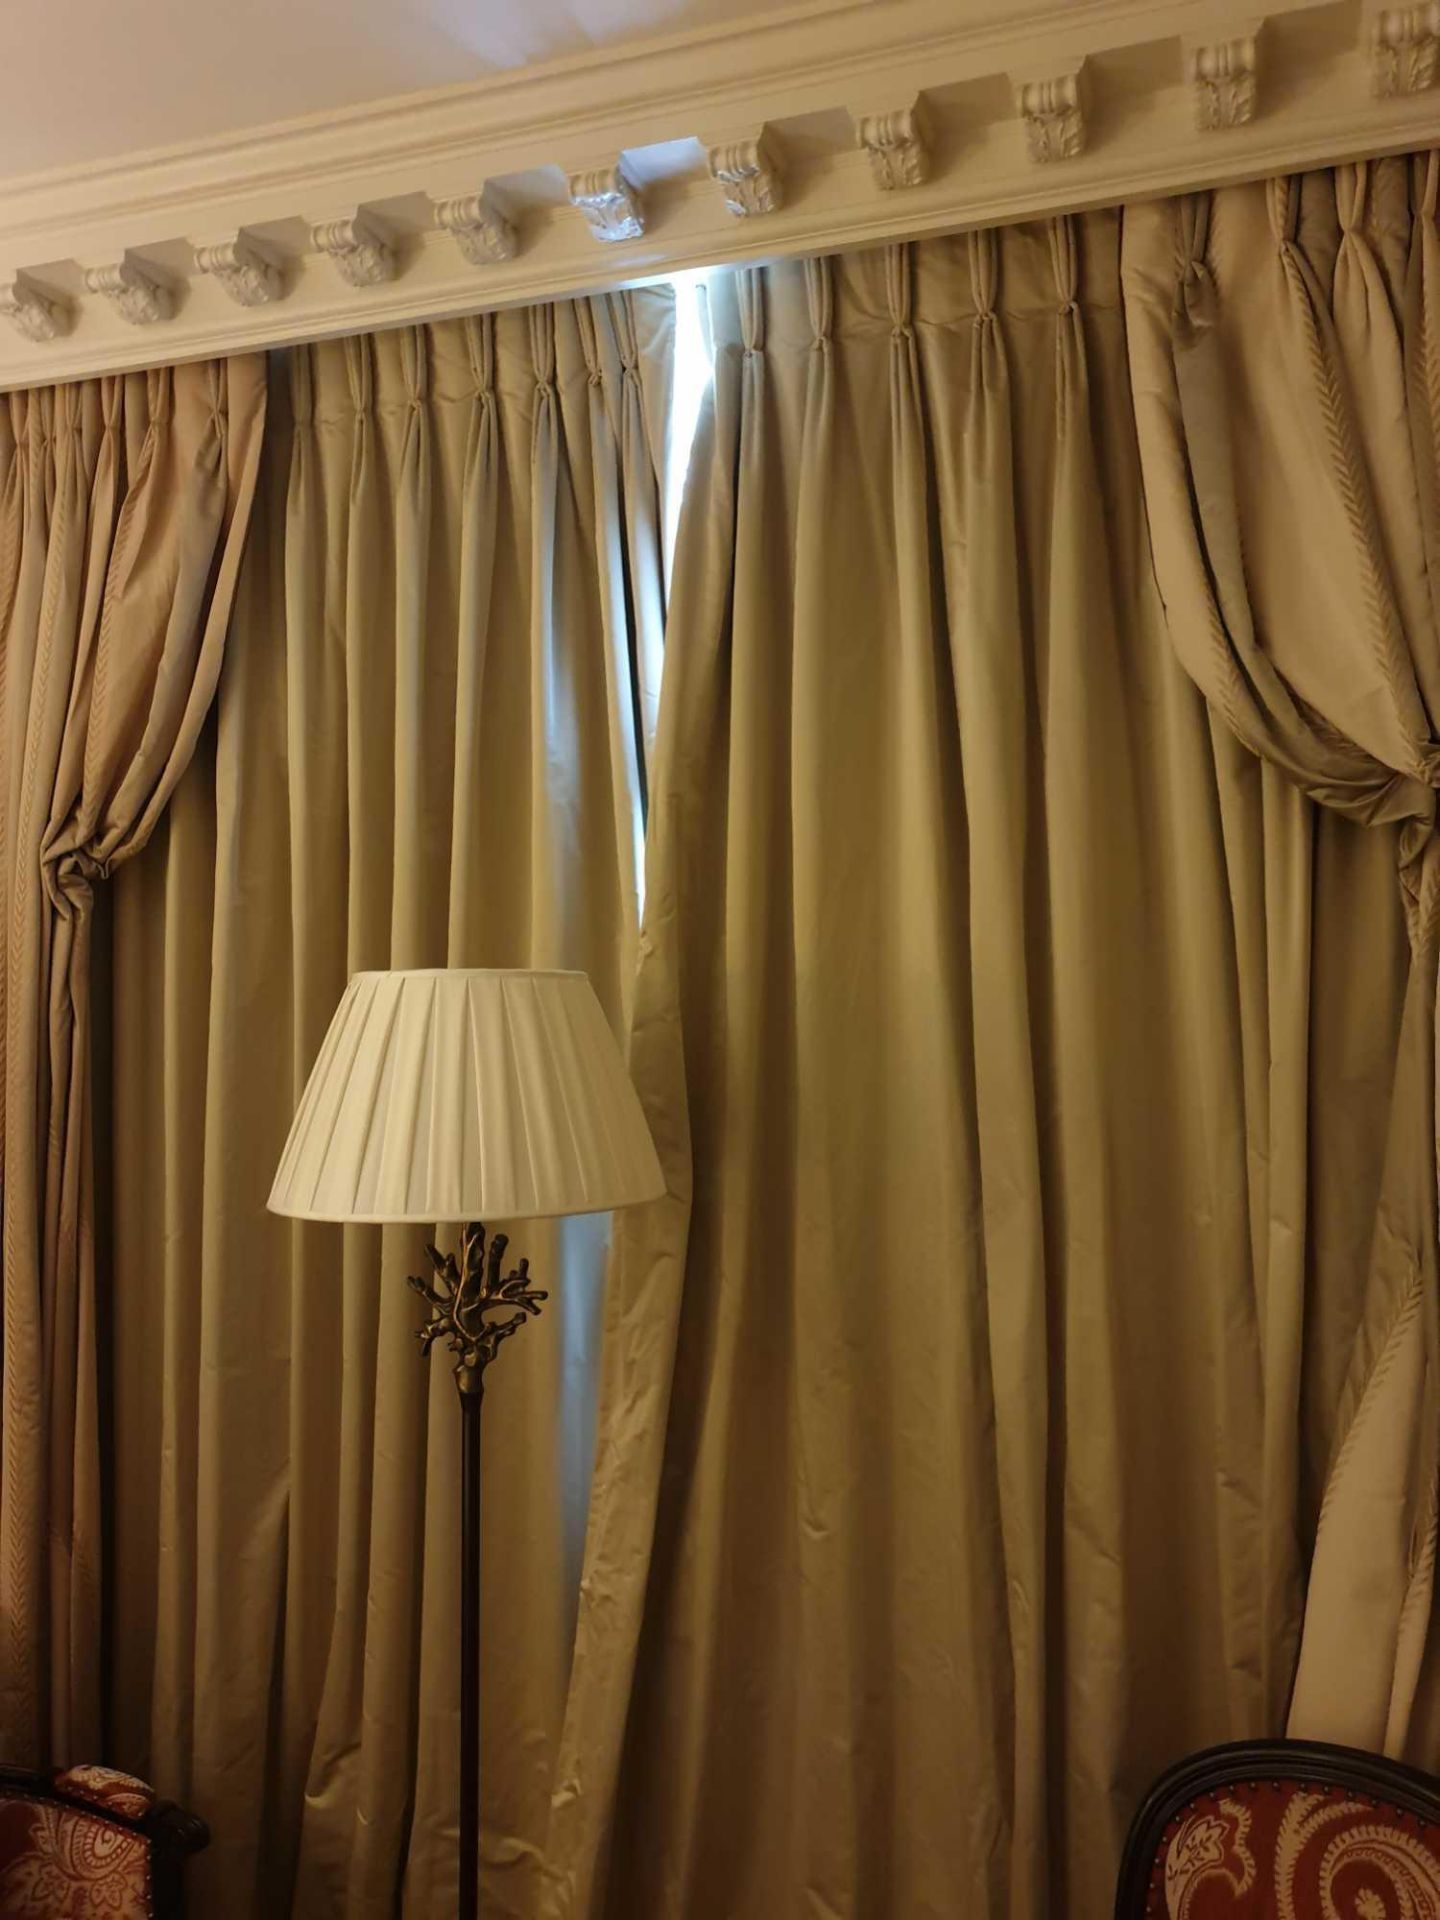 A Pair Of Silk Drapes And Jabots Light Gold And Dark Gold Stripes With Intermittent Gold-Stitched